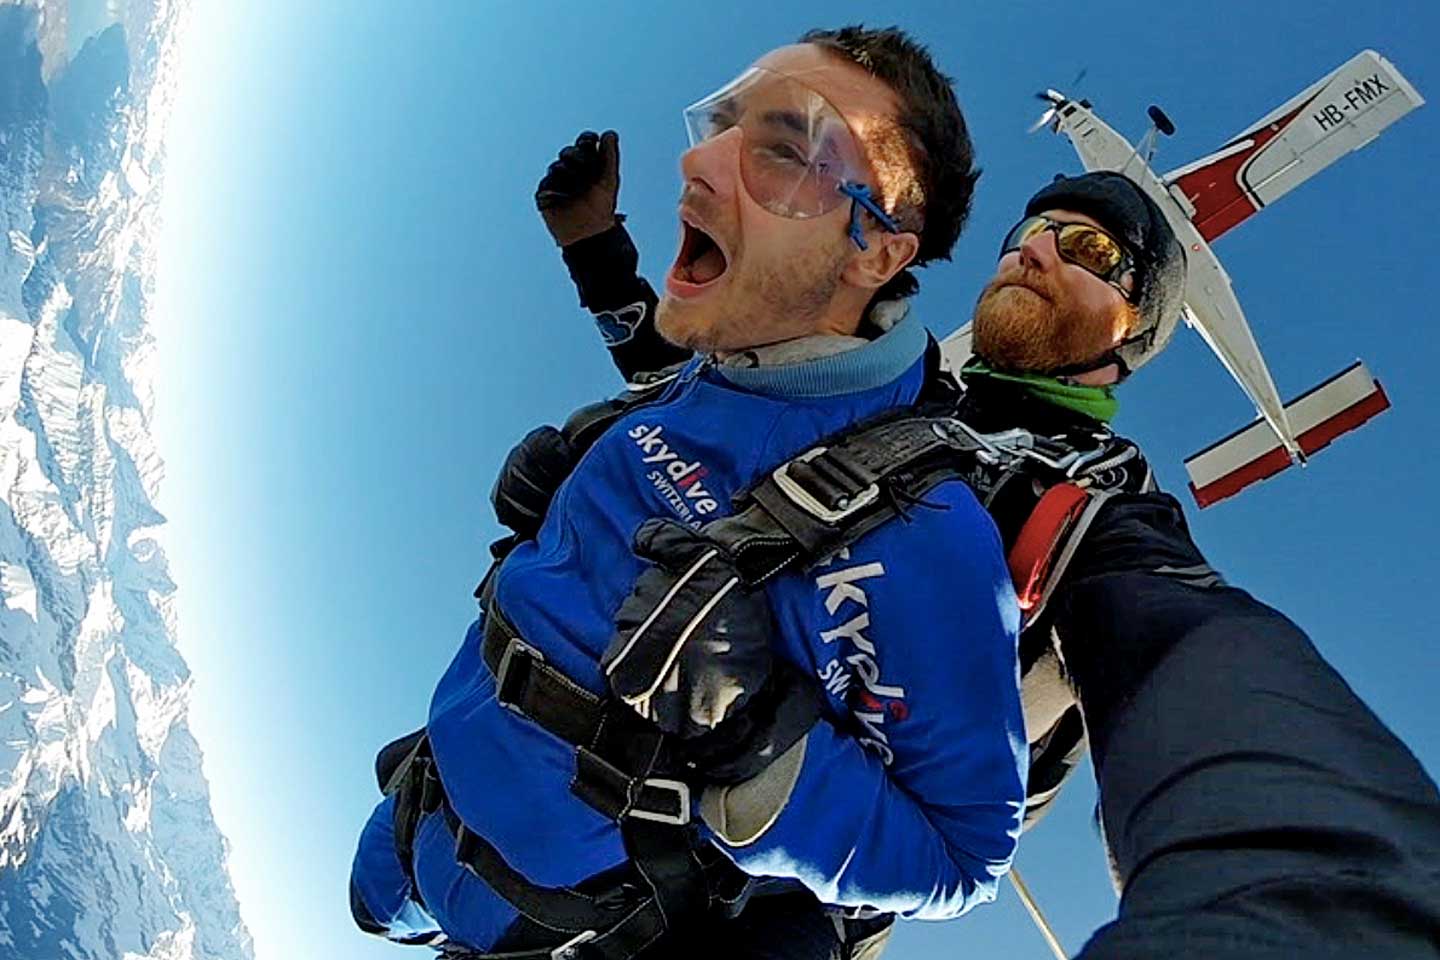 Tom while skydiving